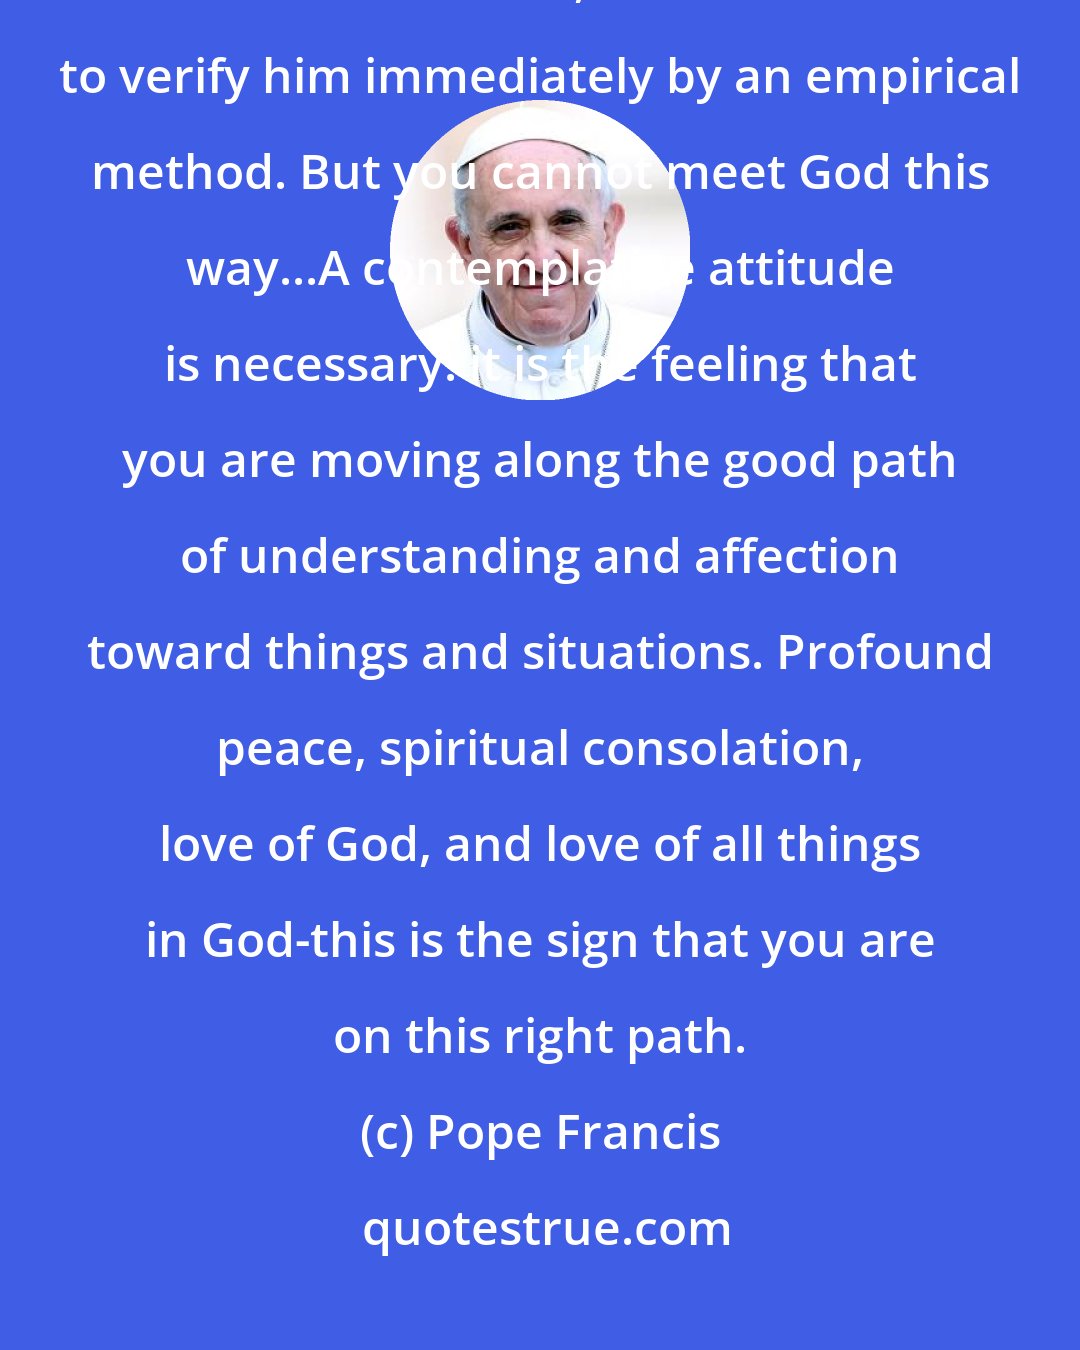 Pope Francis: Finding God in all things is not an 'empirical eureka.' When we desire to encounter God, we would like to verify him immediately by an empirical method. But you cannot meet God this way...A contemplative attitude is necessary: it is the feeling that you are moving along the good path of understanding and affection toward things and situations. Profound peace, spiritual consolation, love of God, and love of all things in God-this is the sign that you are on this right path.